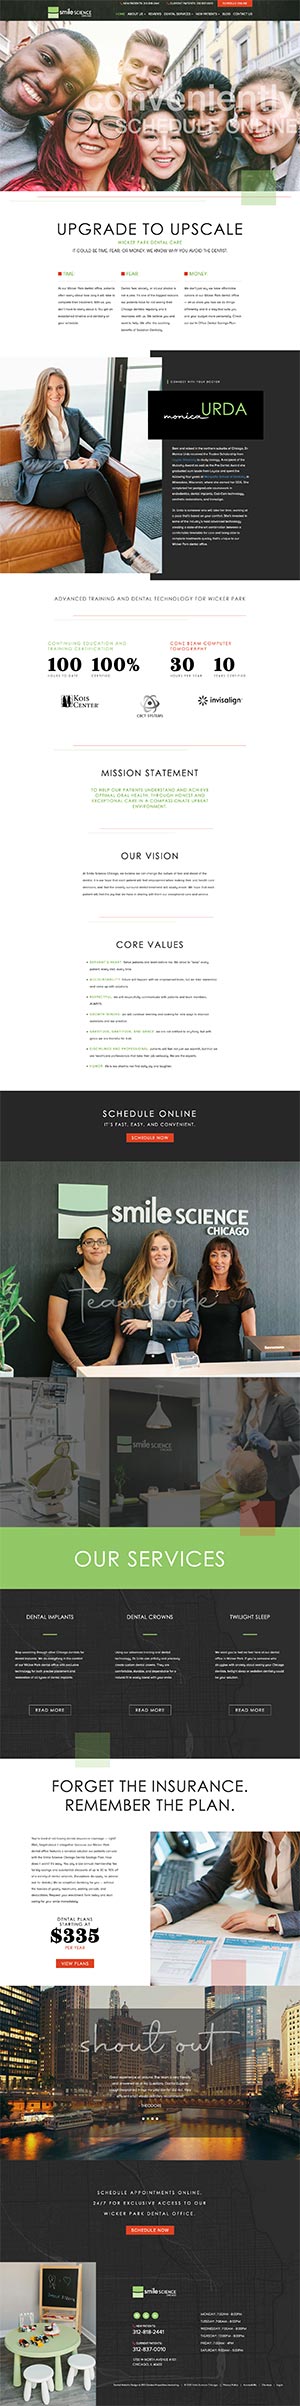 Smile Science Chicago